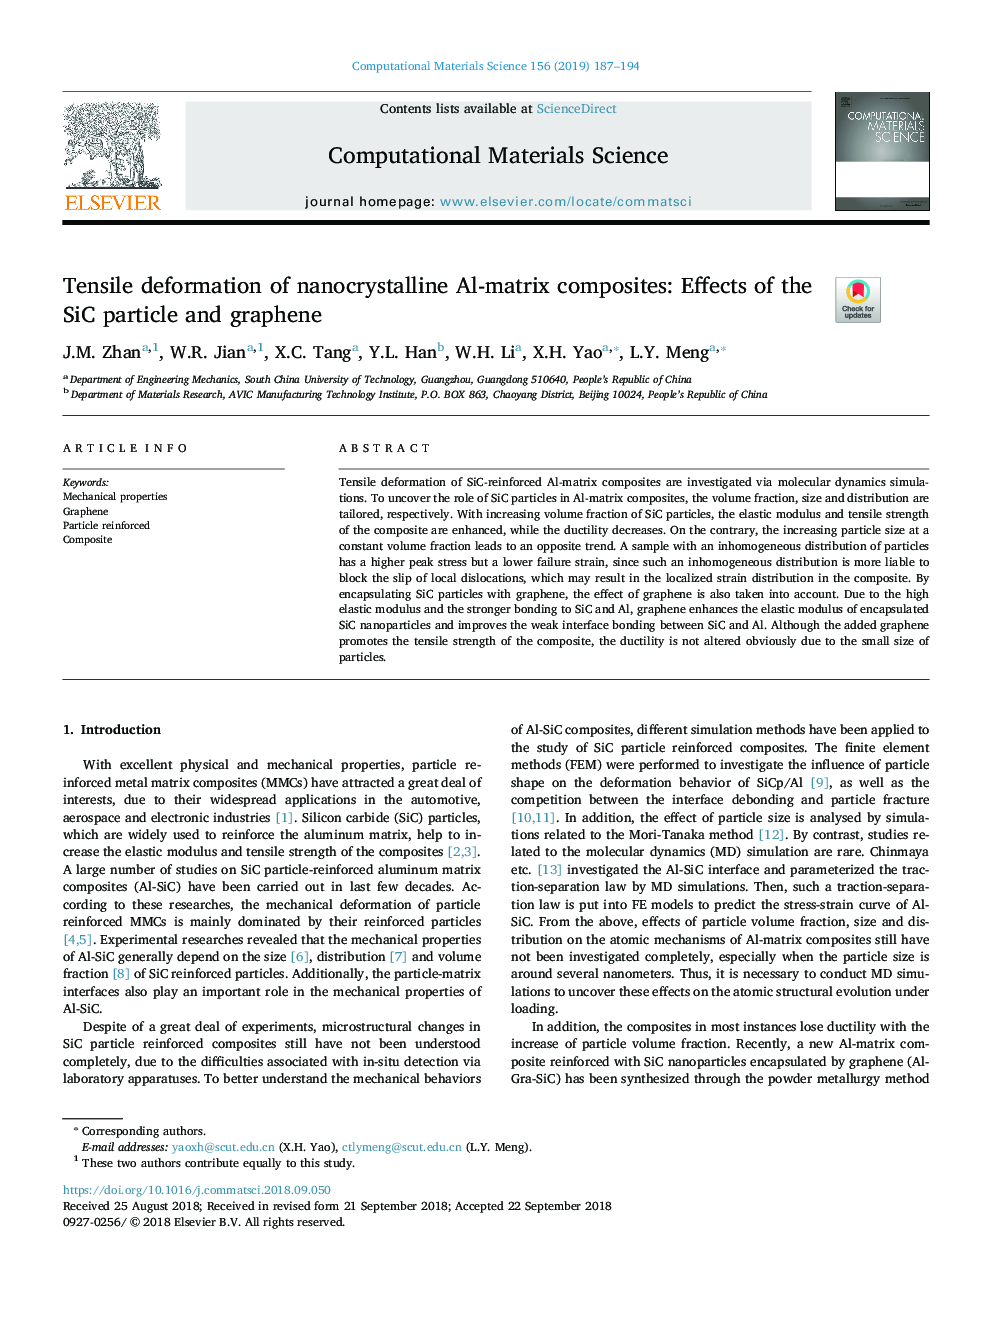 Tensile deformation of nanocrystalline Al-matrix composites: Effects of the SiC particle and graphene